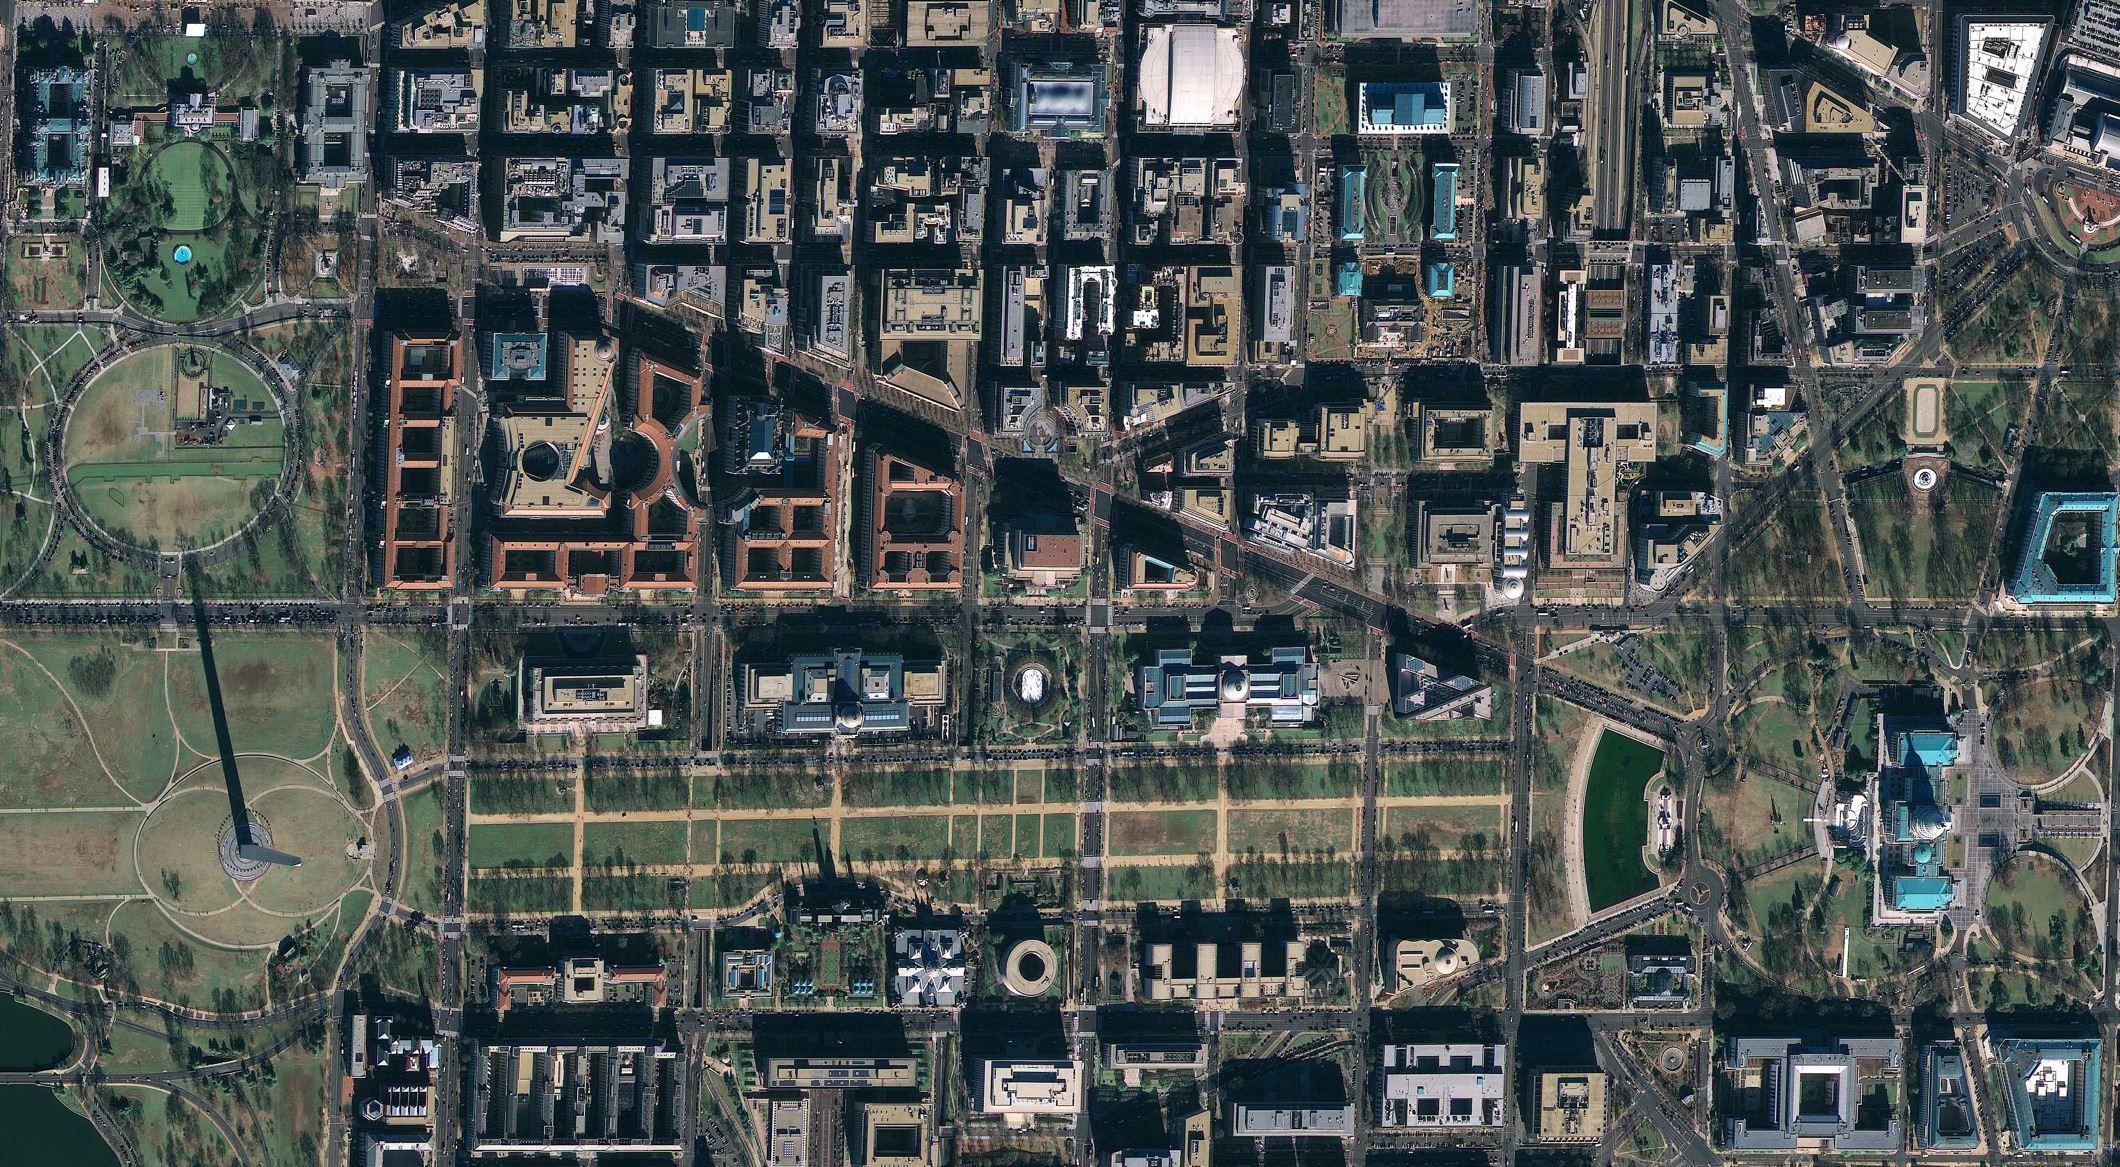 "Google Satellite" Will Have an Orbital View Over Obama's ...